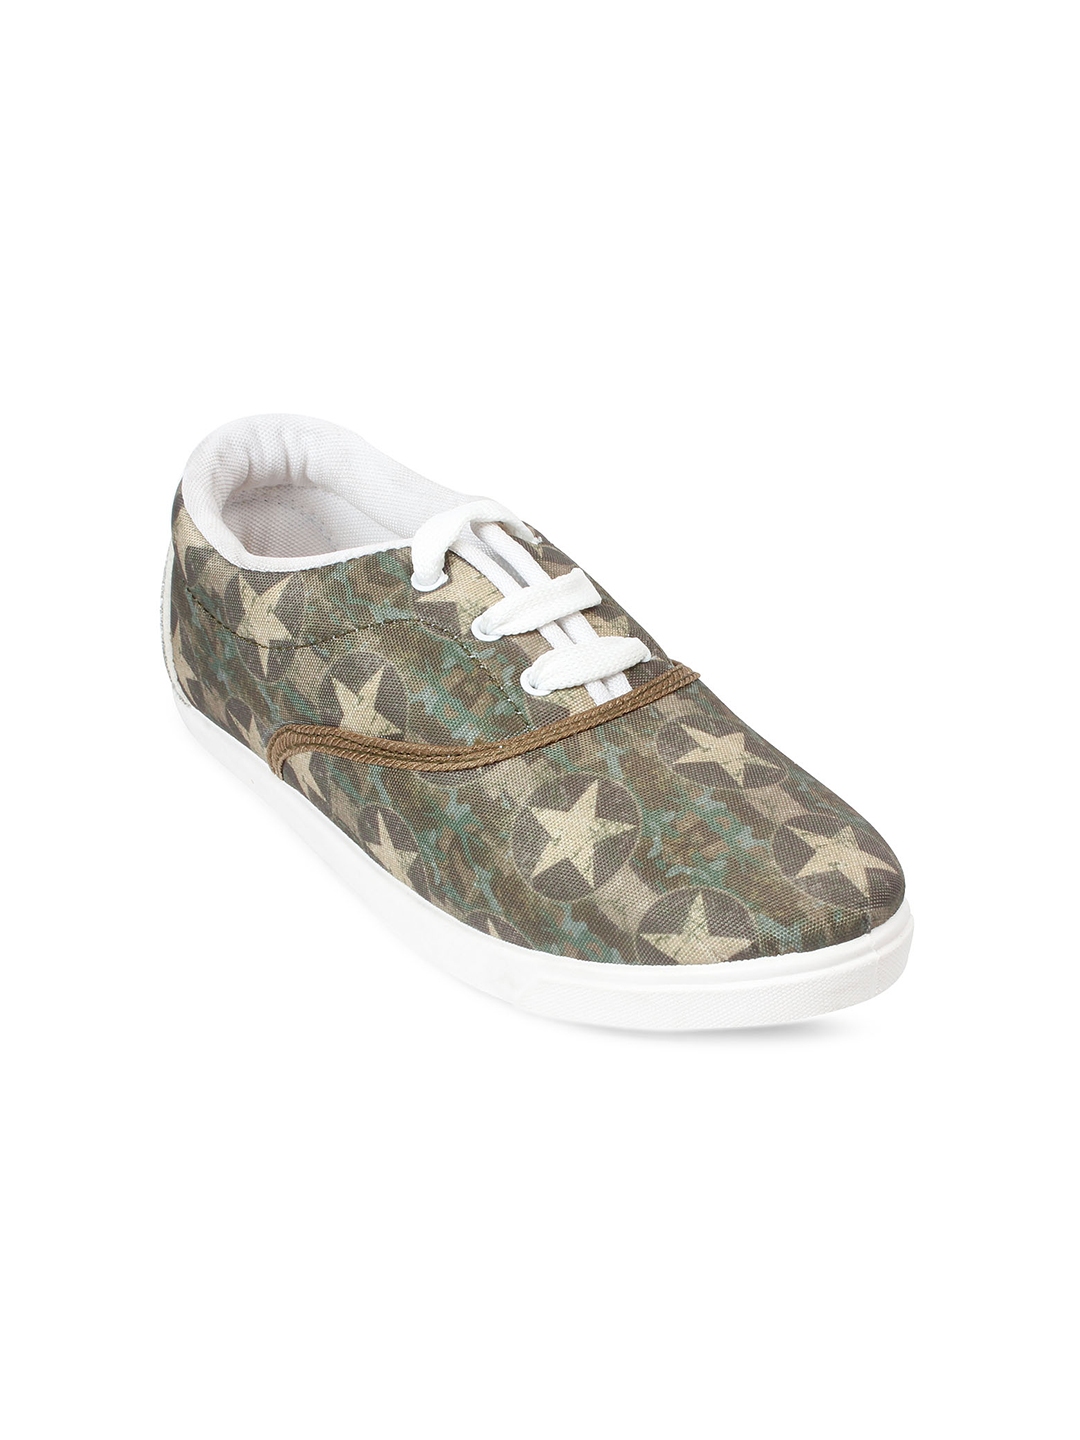 olive green sneakers womens